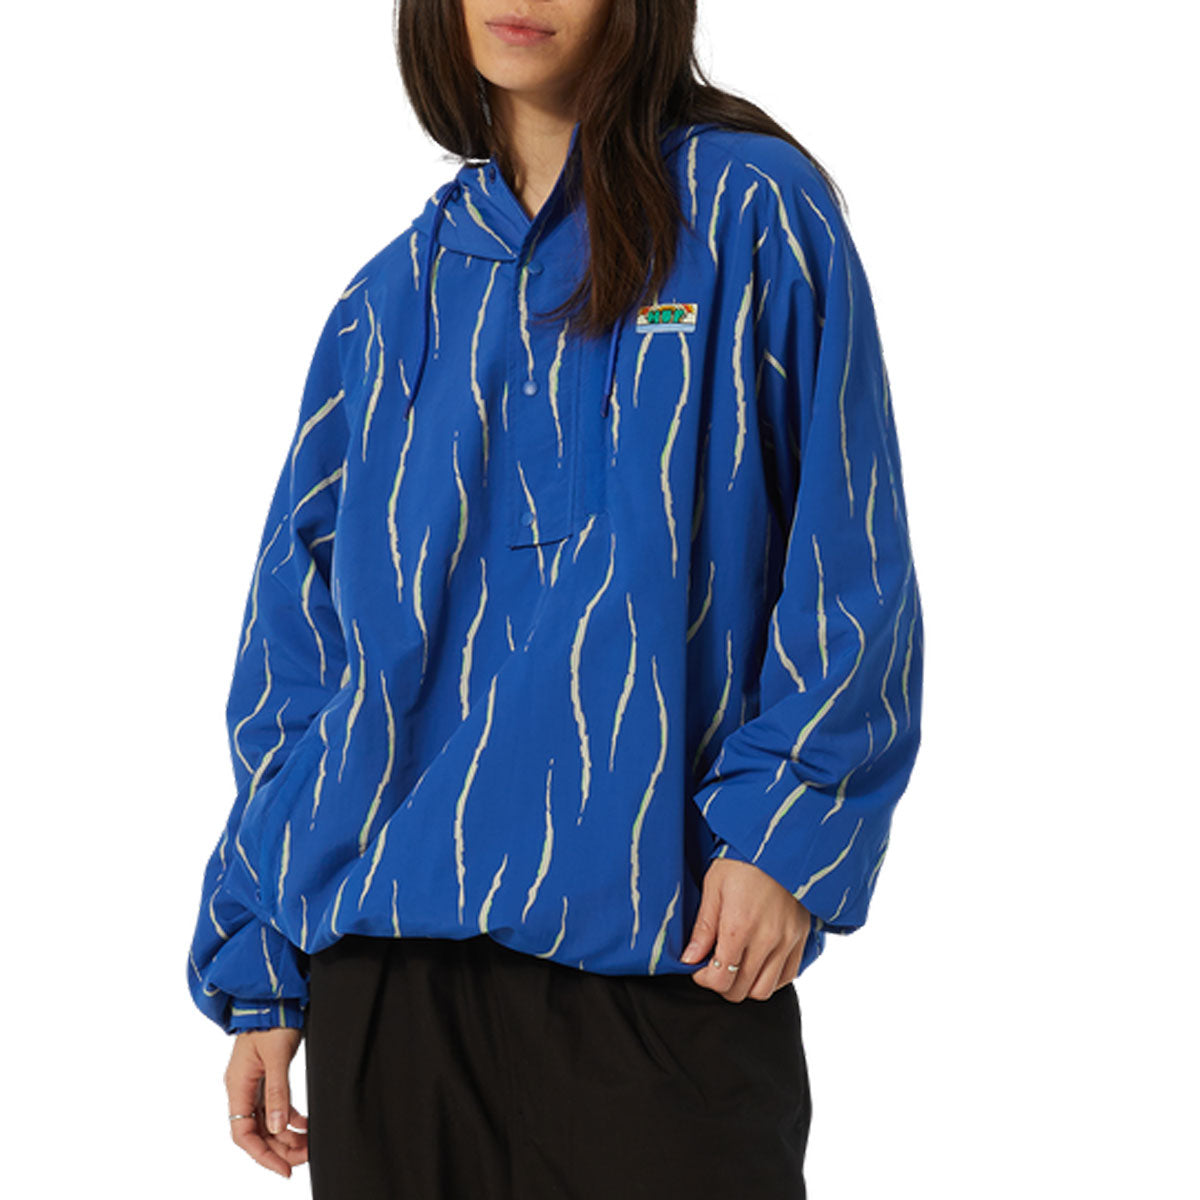 HUF New Day Striped Packable Anorak Jacket - Blue image 5